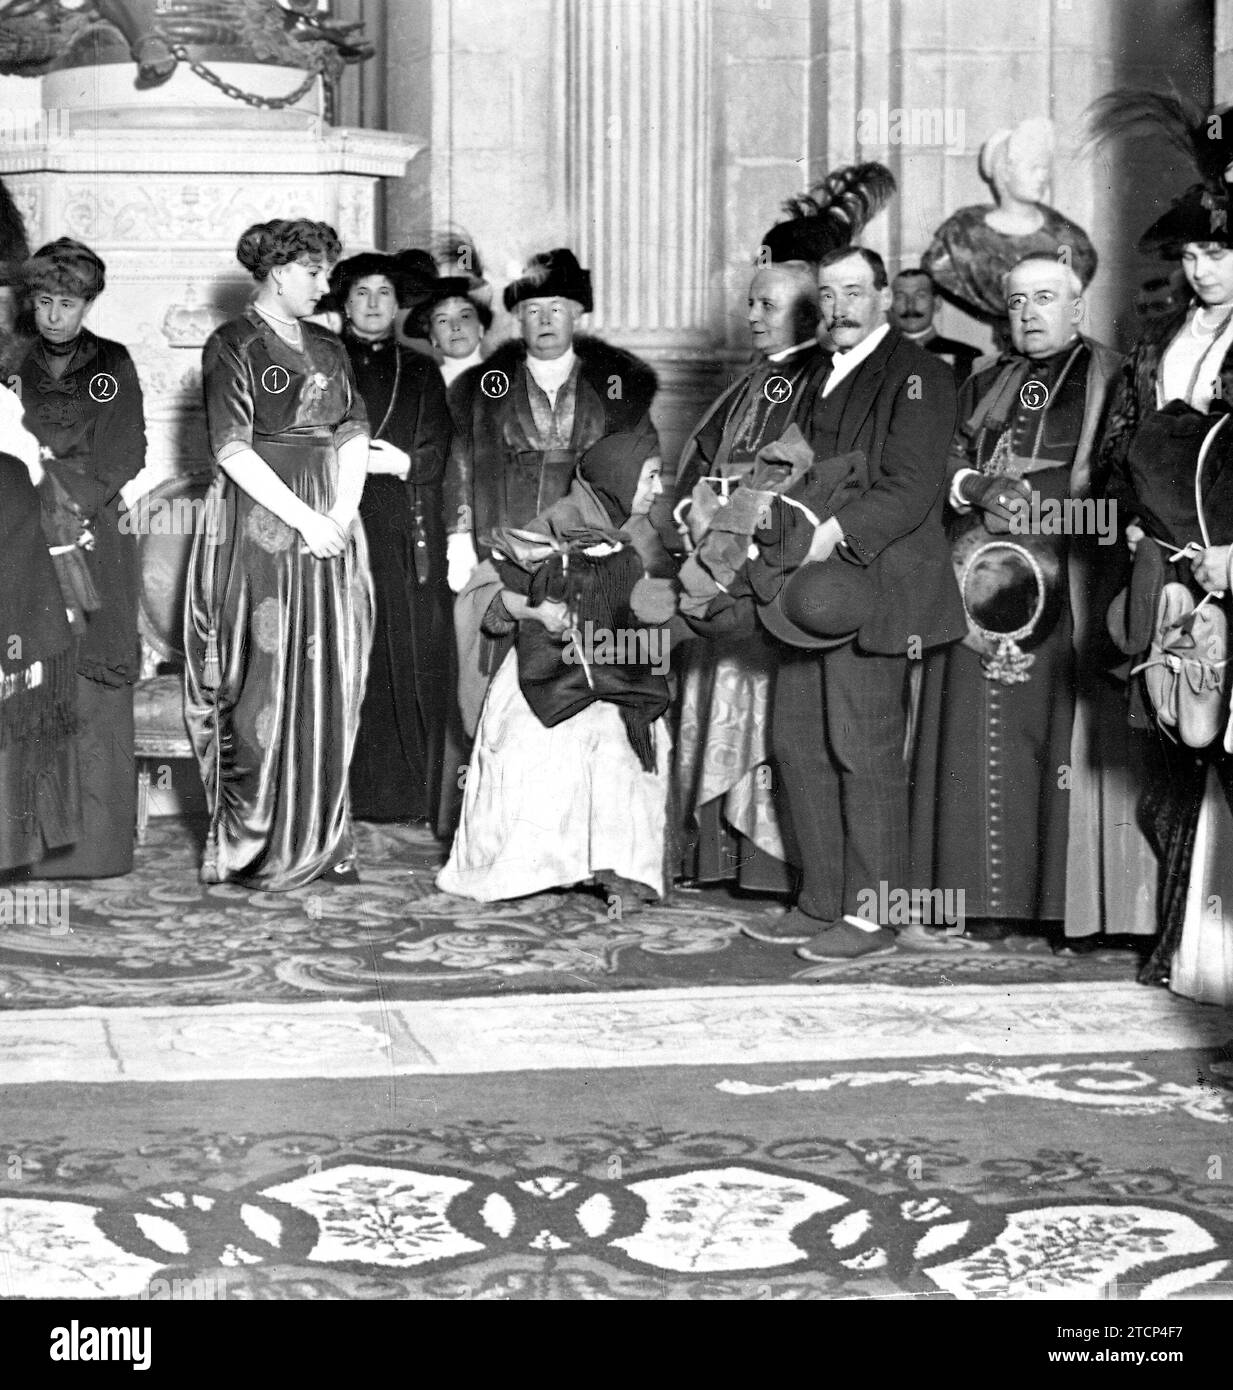 12/18/1913. Distribution of Clothes in the Palace. YE. Queen Victoria Eugenia (1), Queen María Cristina (2), HRH Infanta Isabel (3), the SS Nuncio (4), and the Bishop of Madrid-Alcalá (5), during the ceremony distribution of Clothes to the Poor, Verified yesterday afternoon. Credit: Album / Archivo ABC / José Zegri Stock Photo